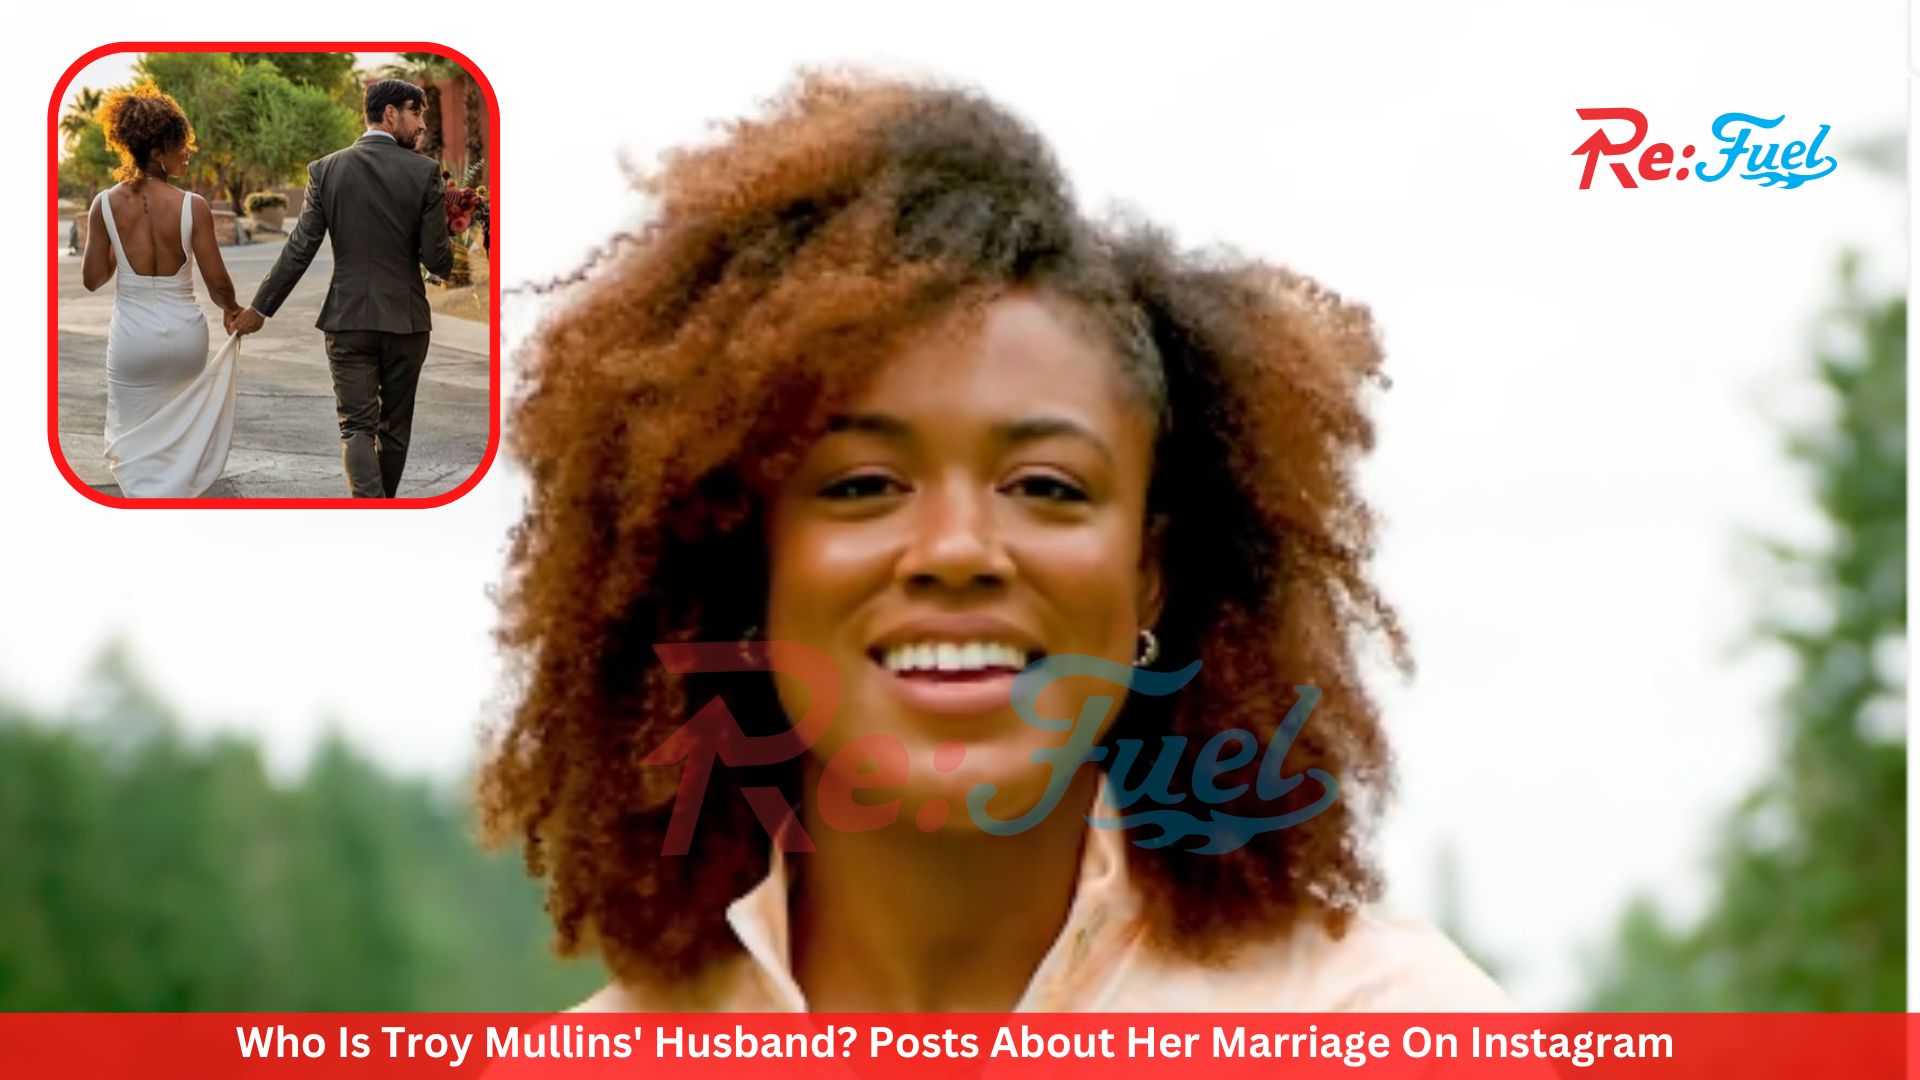 Who Is Troy Mullins' Husband? Posts About Her Marriage On Instagram